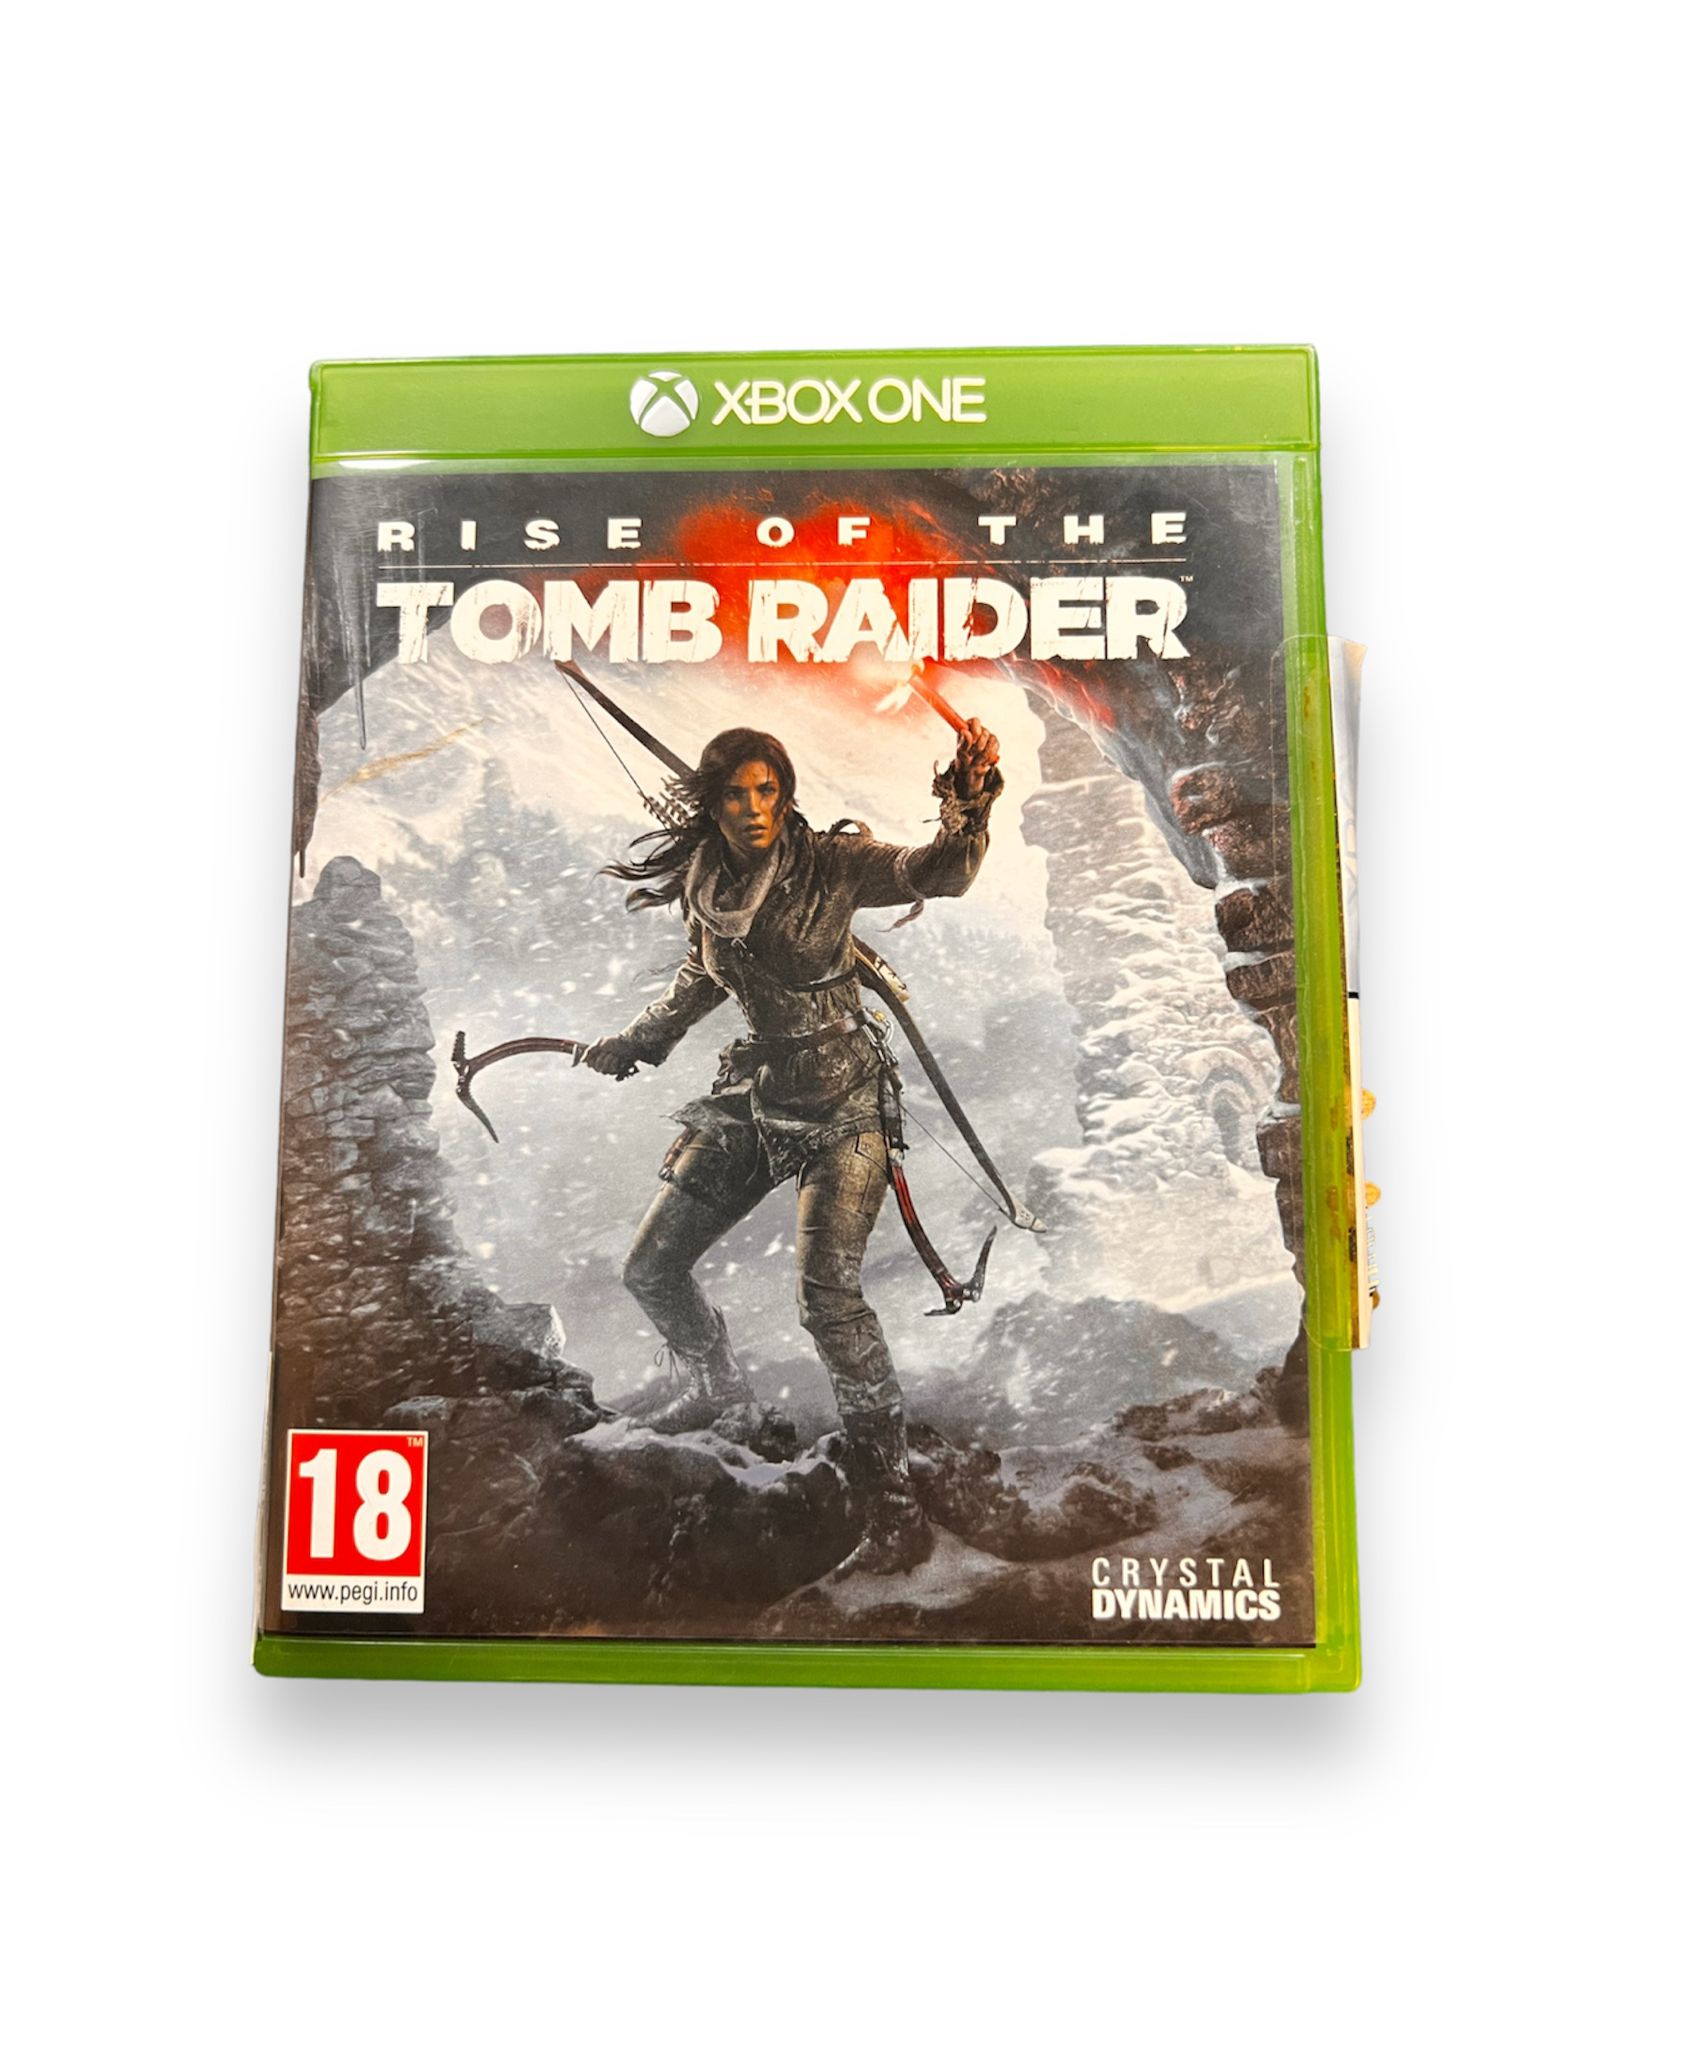 Rise of the Tomb Raider Xbox One game